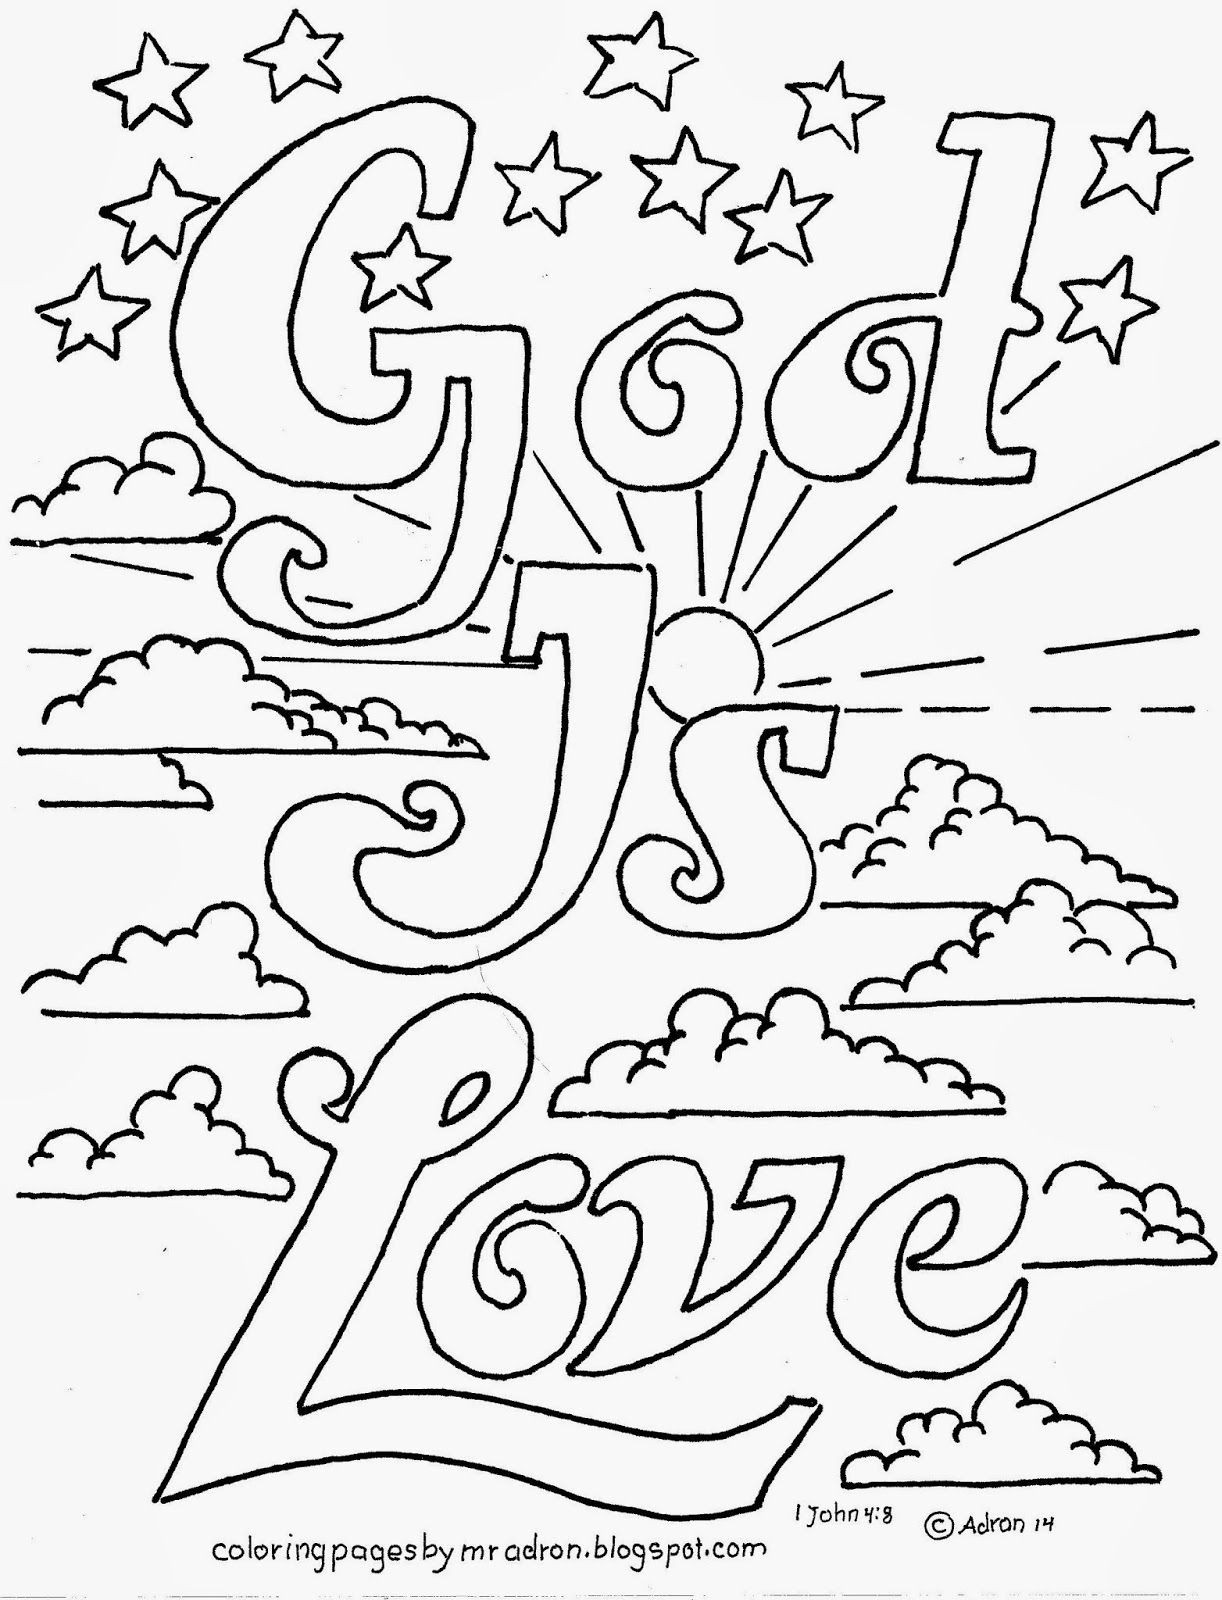 Child Of God Coloring Page
 Coloring Pages for Kids by Mr Adron God Is Love